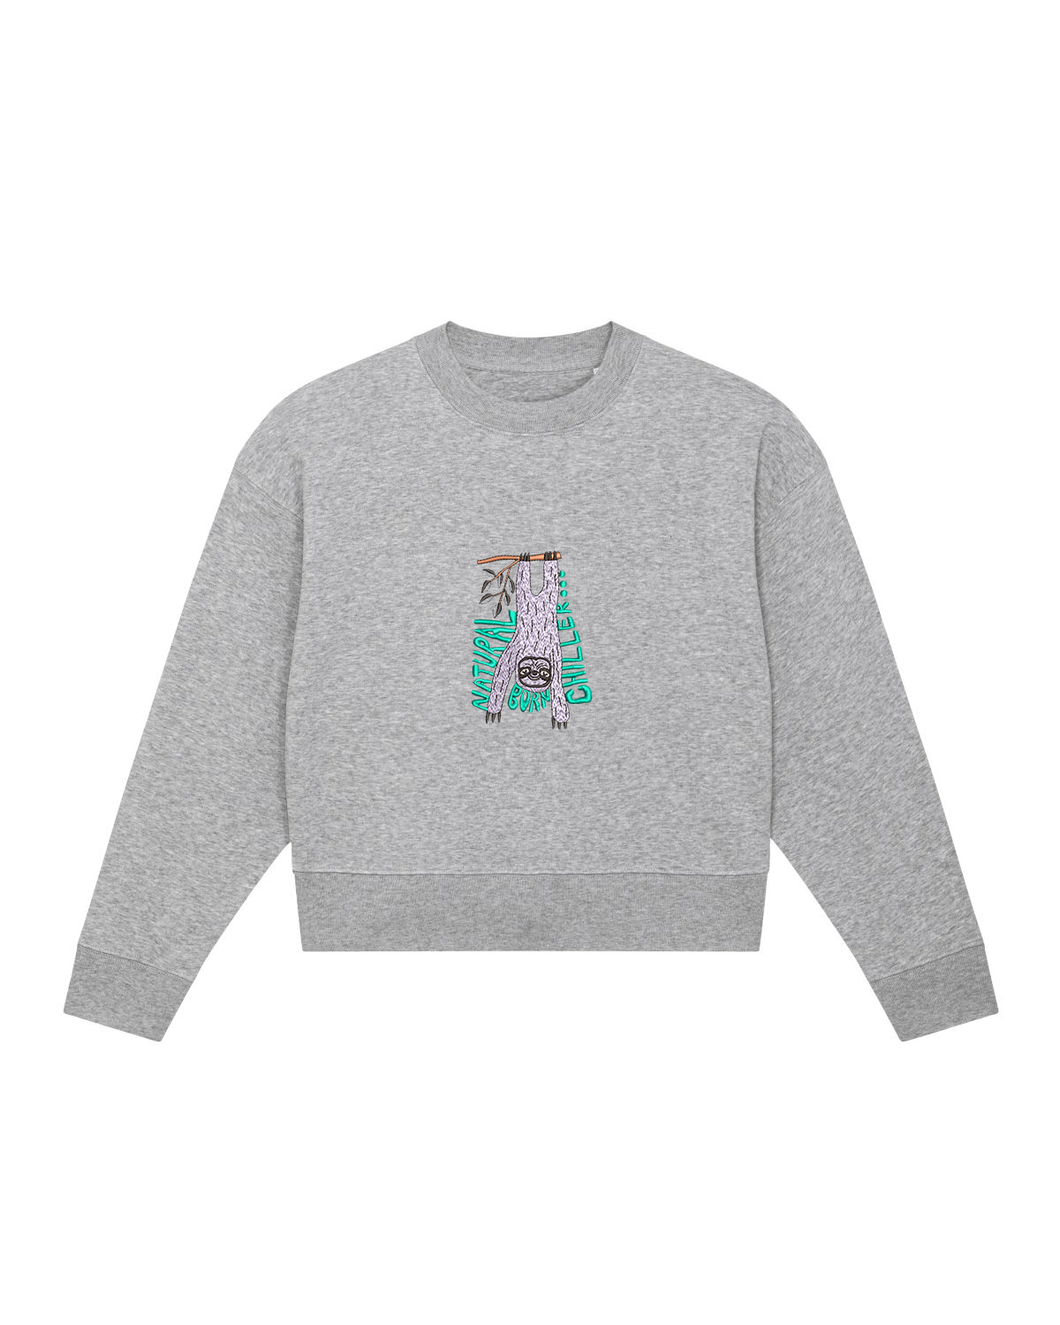 NATURAL BORN CHILLER... Embroidered WOMEN'S CROPPED CREW NECK SWEATSHIRT